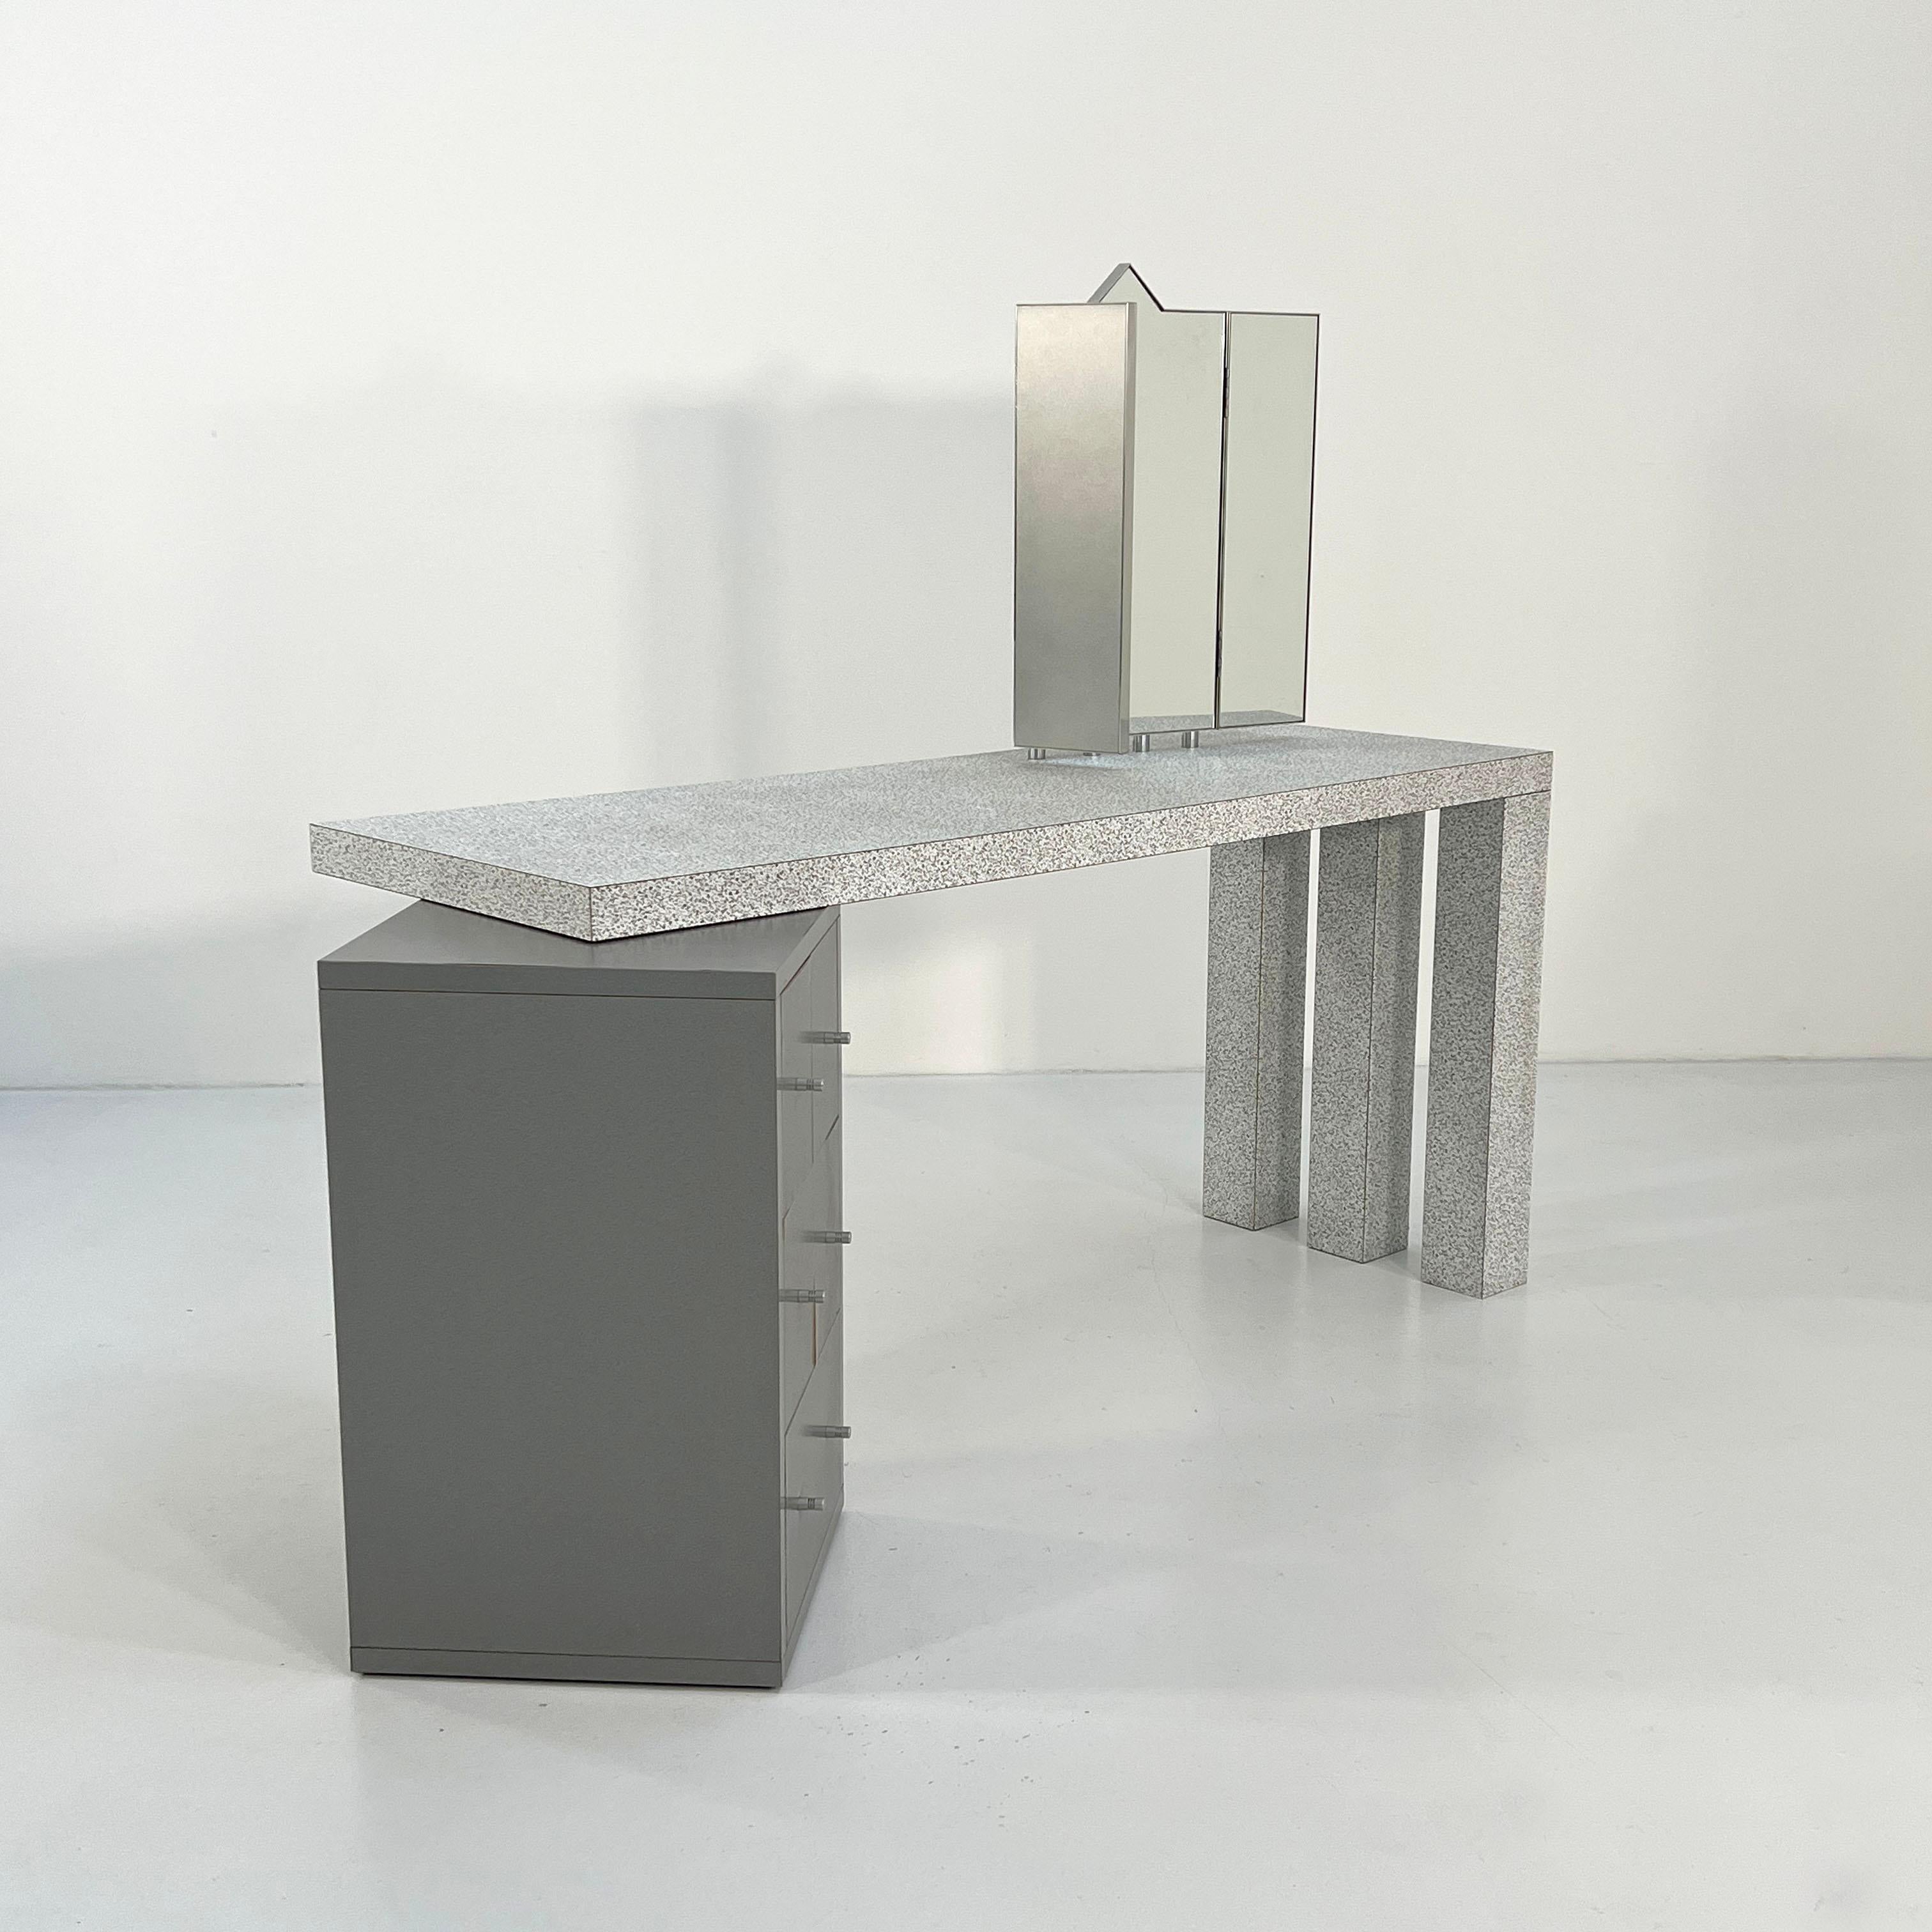 Designer - Antonia Astori
Producer - Driade
Model - Dione Dressing Table
Design Period - Eighties
Measurements - Width 174 cm x Depth 72 cm x Height 73 cm
Materials - Metal, Laminate 
Color - Grey, White
Light wear consistent with age and use. One